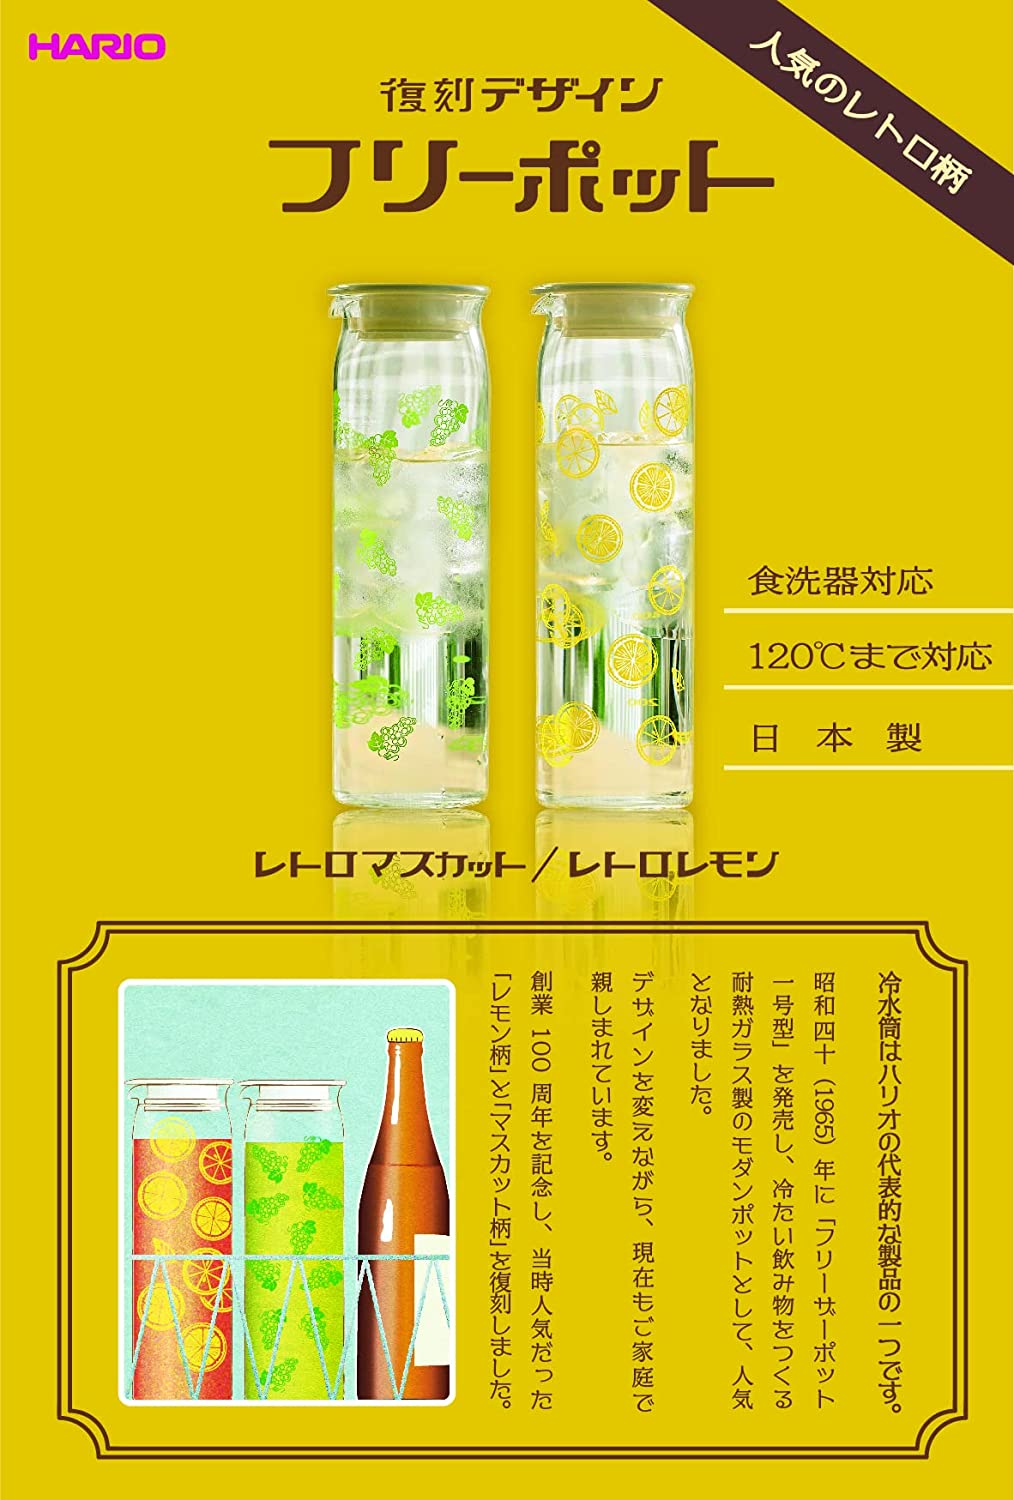 HARIO - Herb Water Maker ハーブウォーターメーカーの通販 by